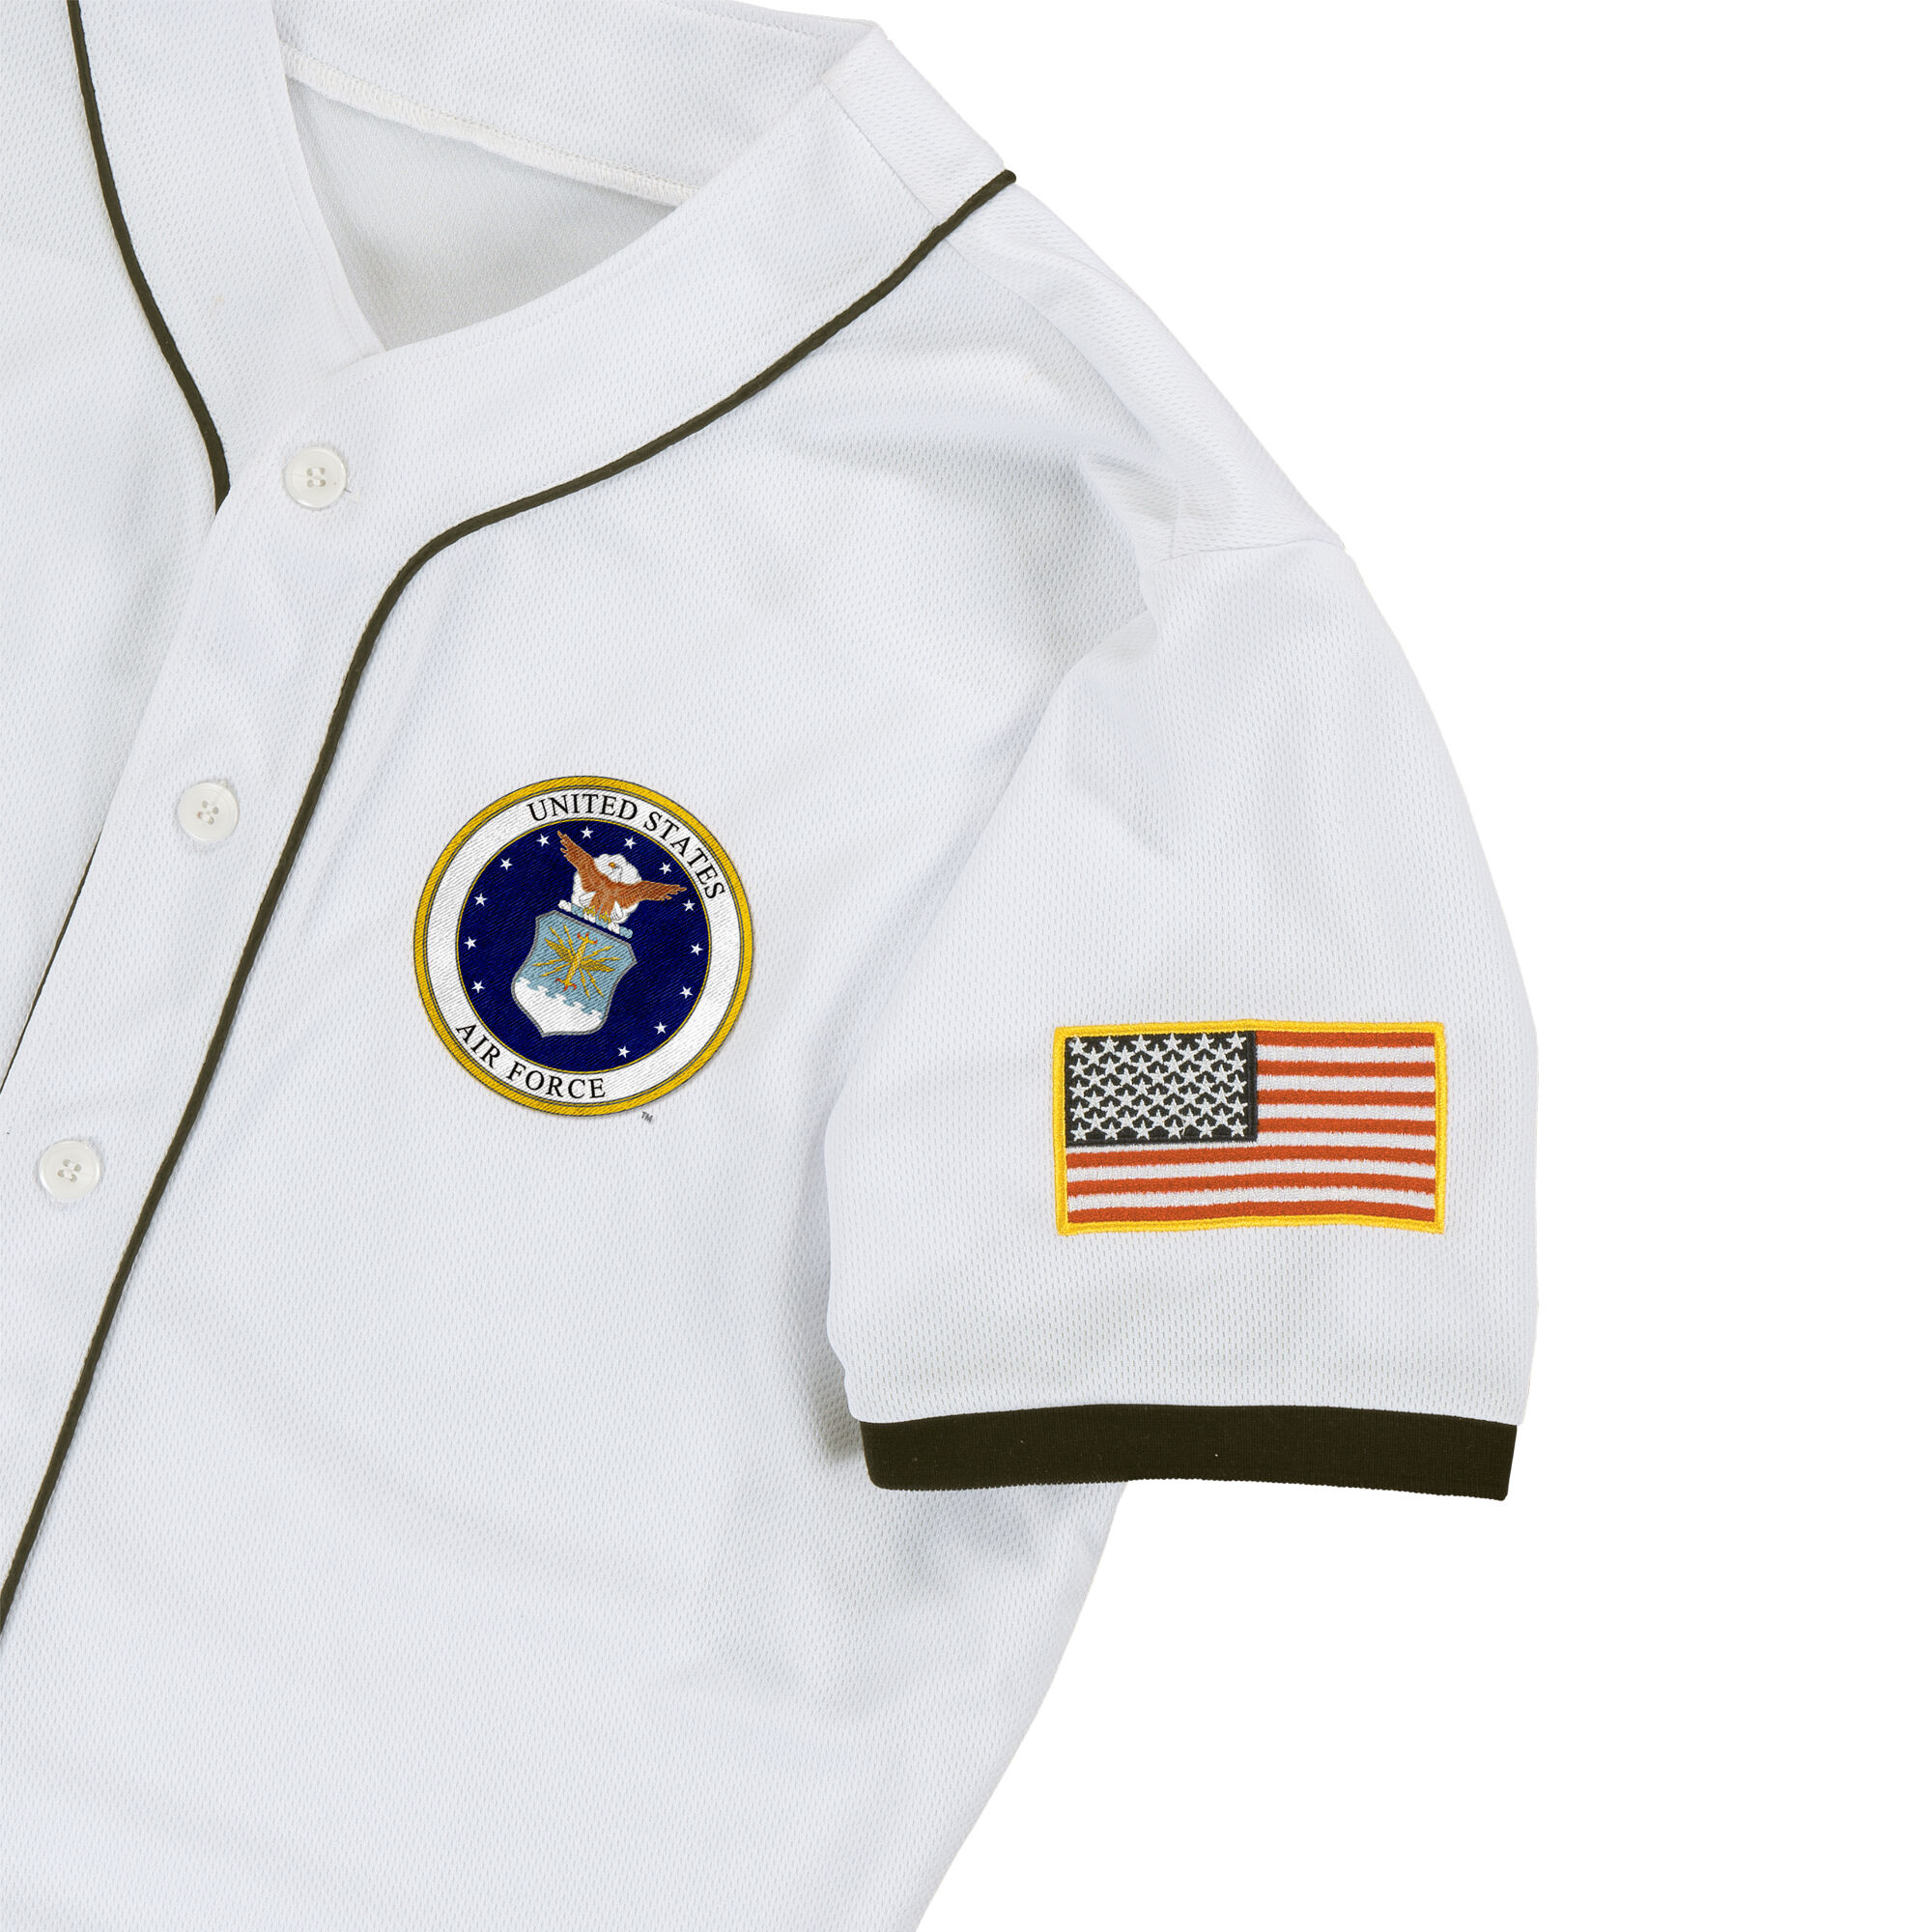 The Personalized US Air Force Baseball Jersey 10650 0036 d detail